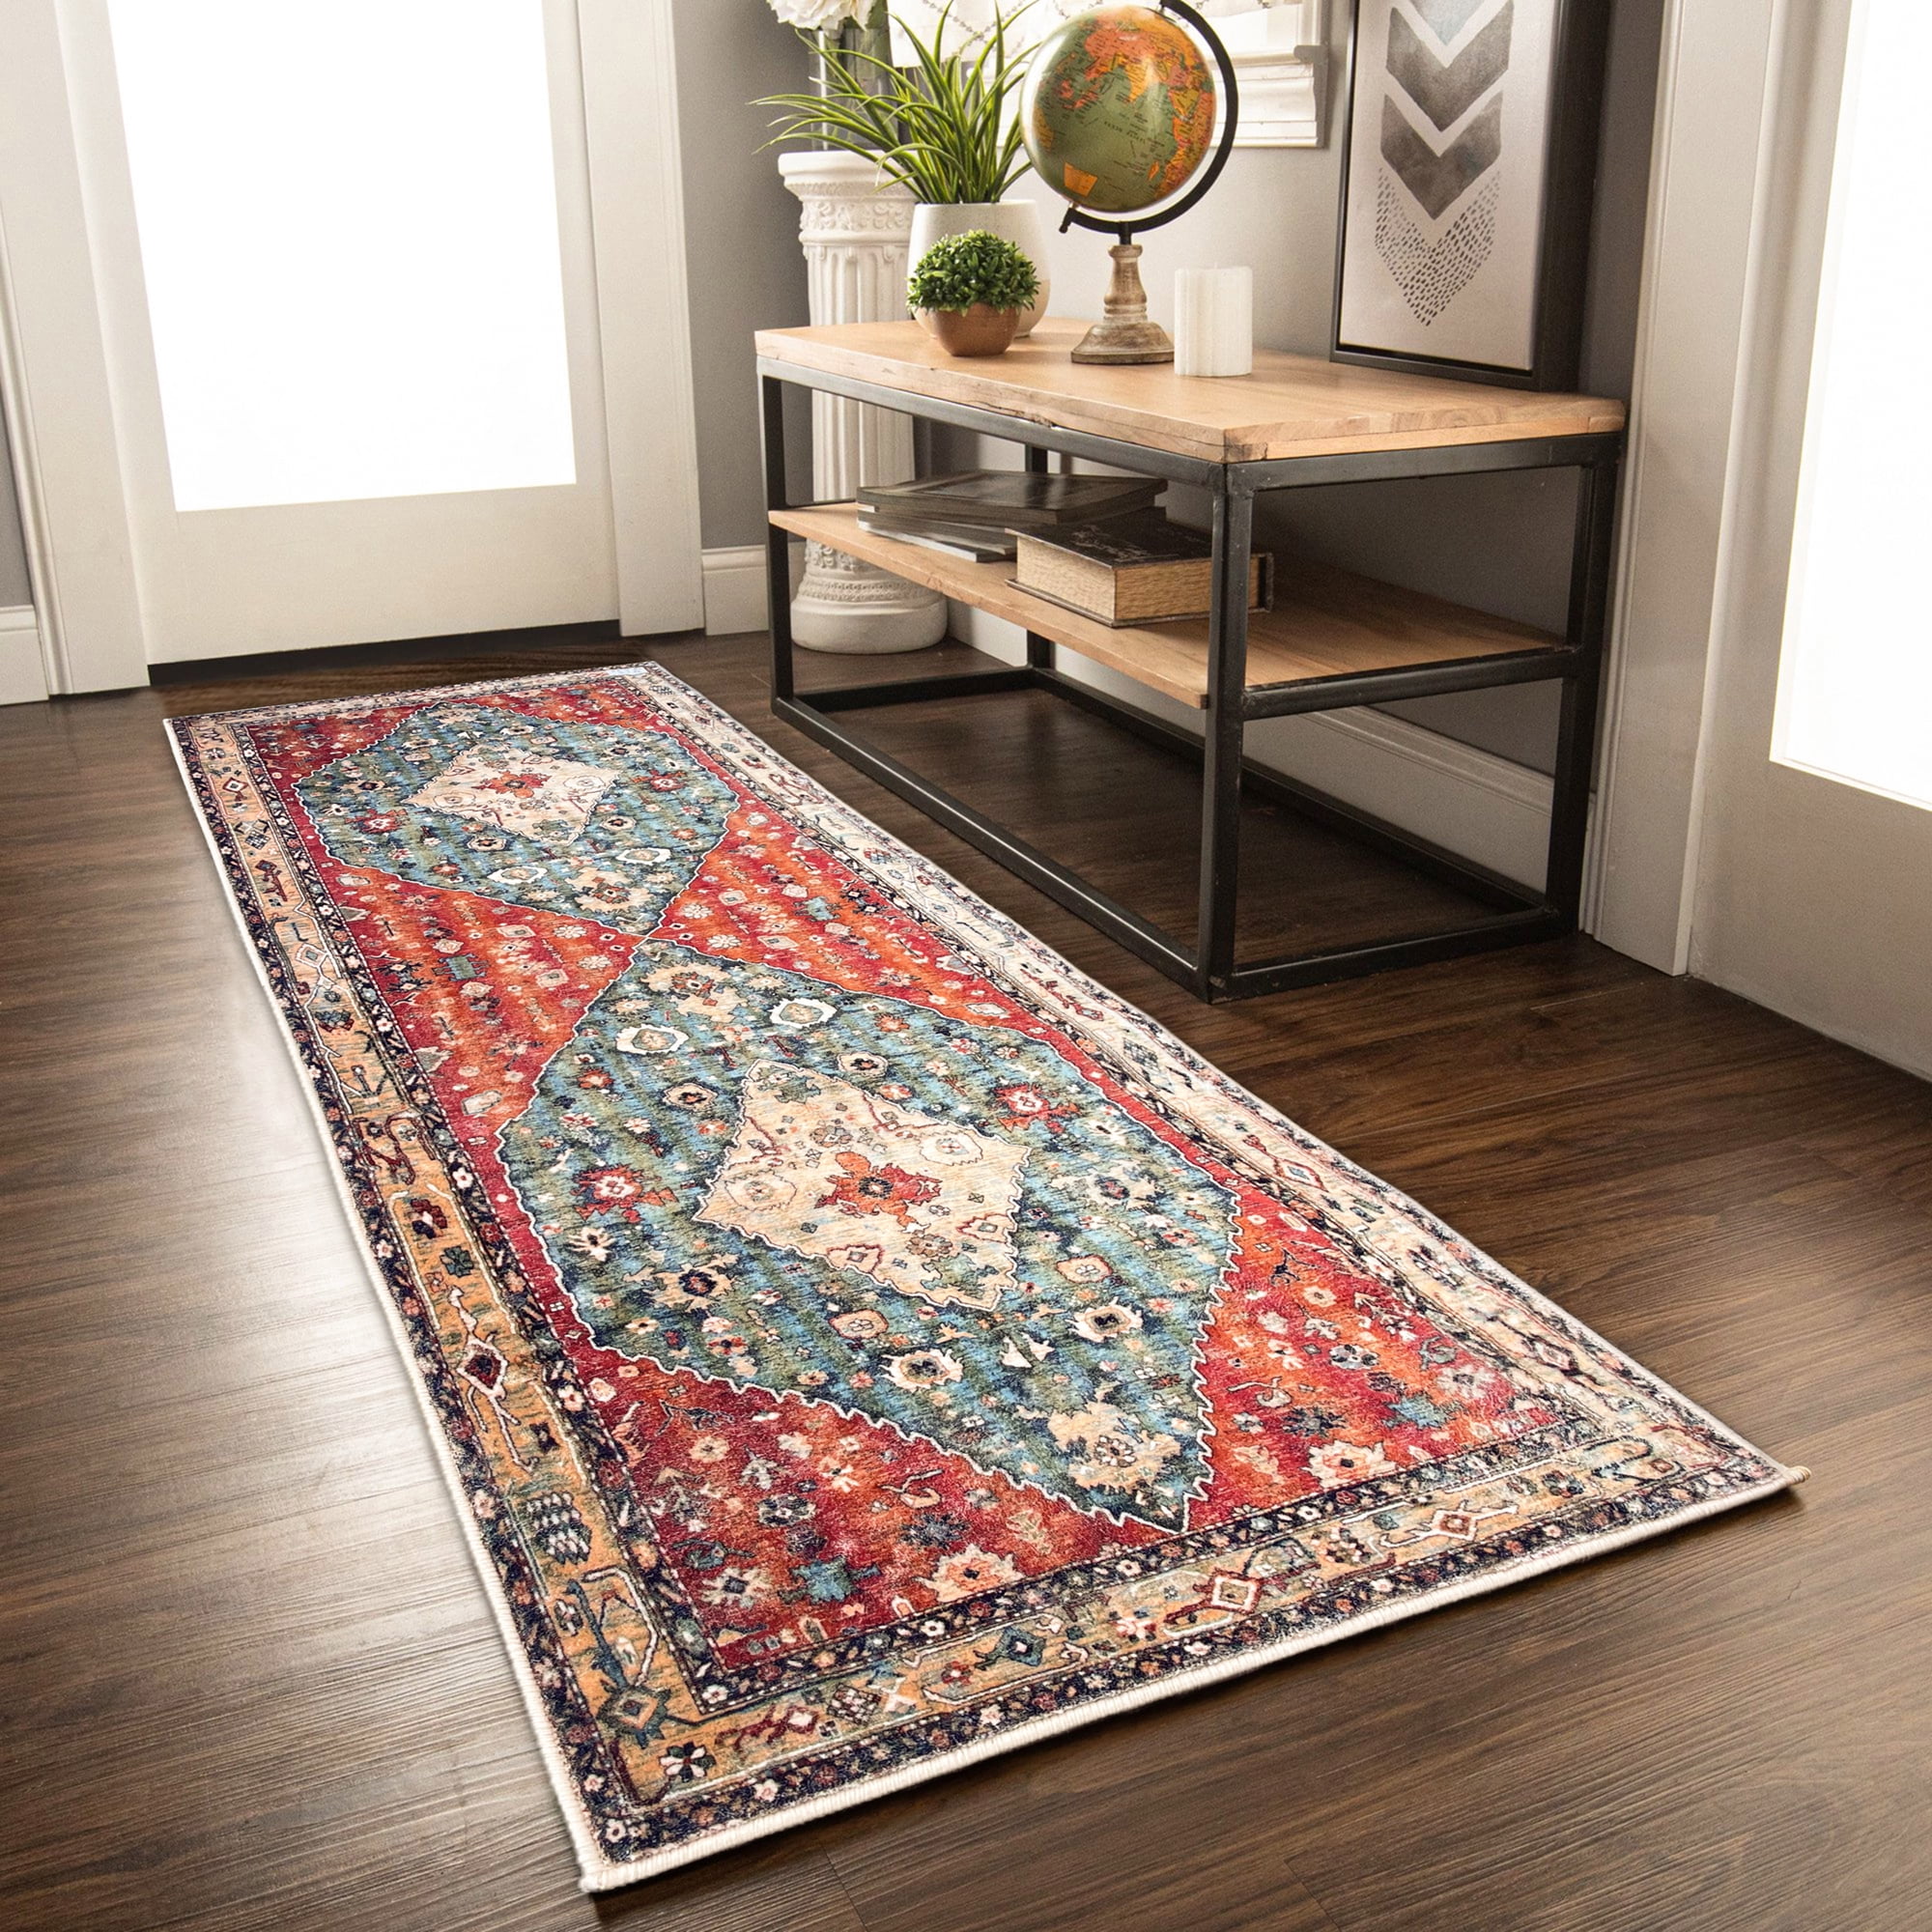 Lahome Oriental Bedroom Rug - 3x5 Washable Non Slip Throw Front Door Rugs,  Blue Bathroom Rugs for Living Room, Vintage Soft Indoor Carpet for Dorm